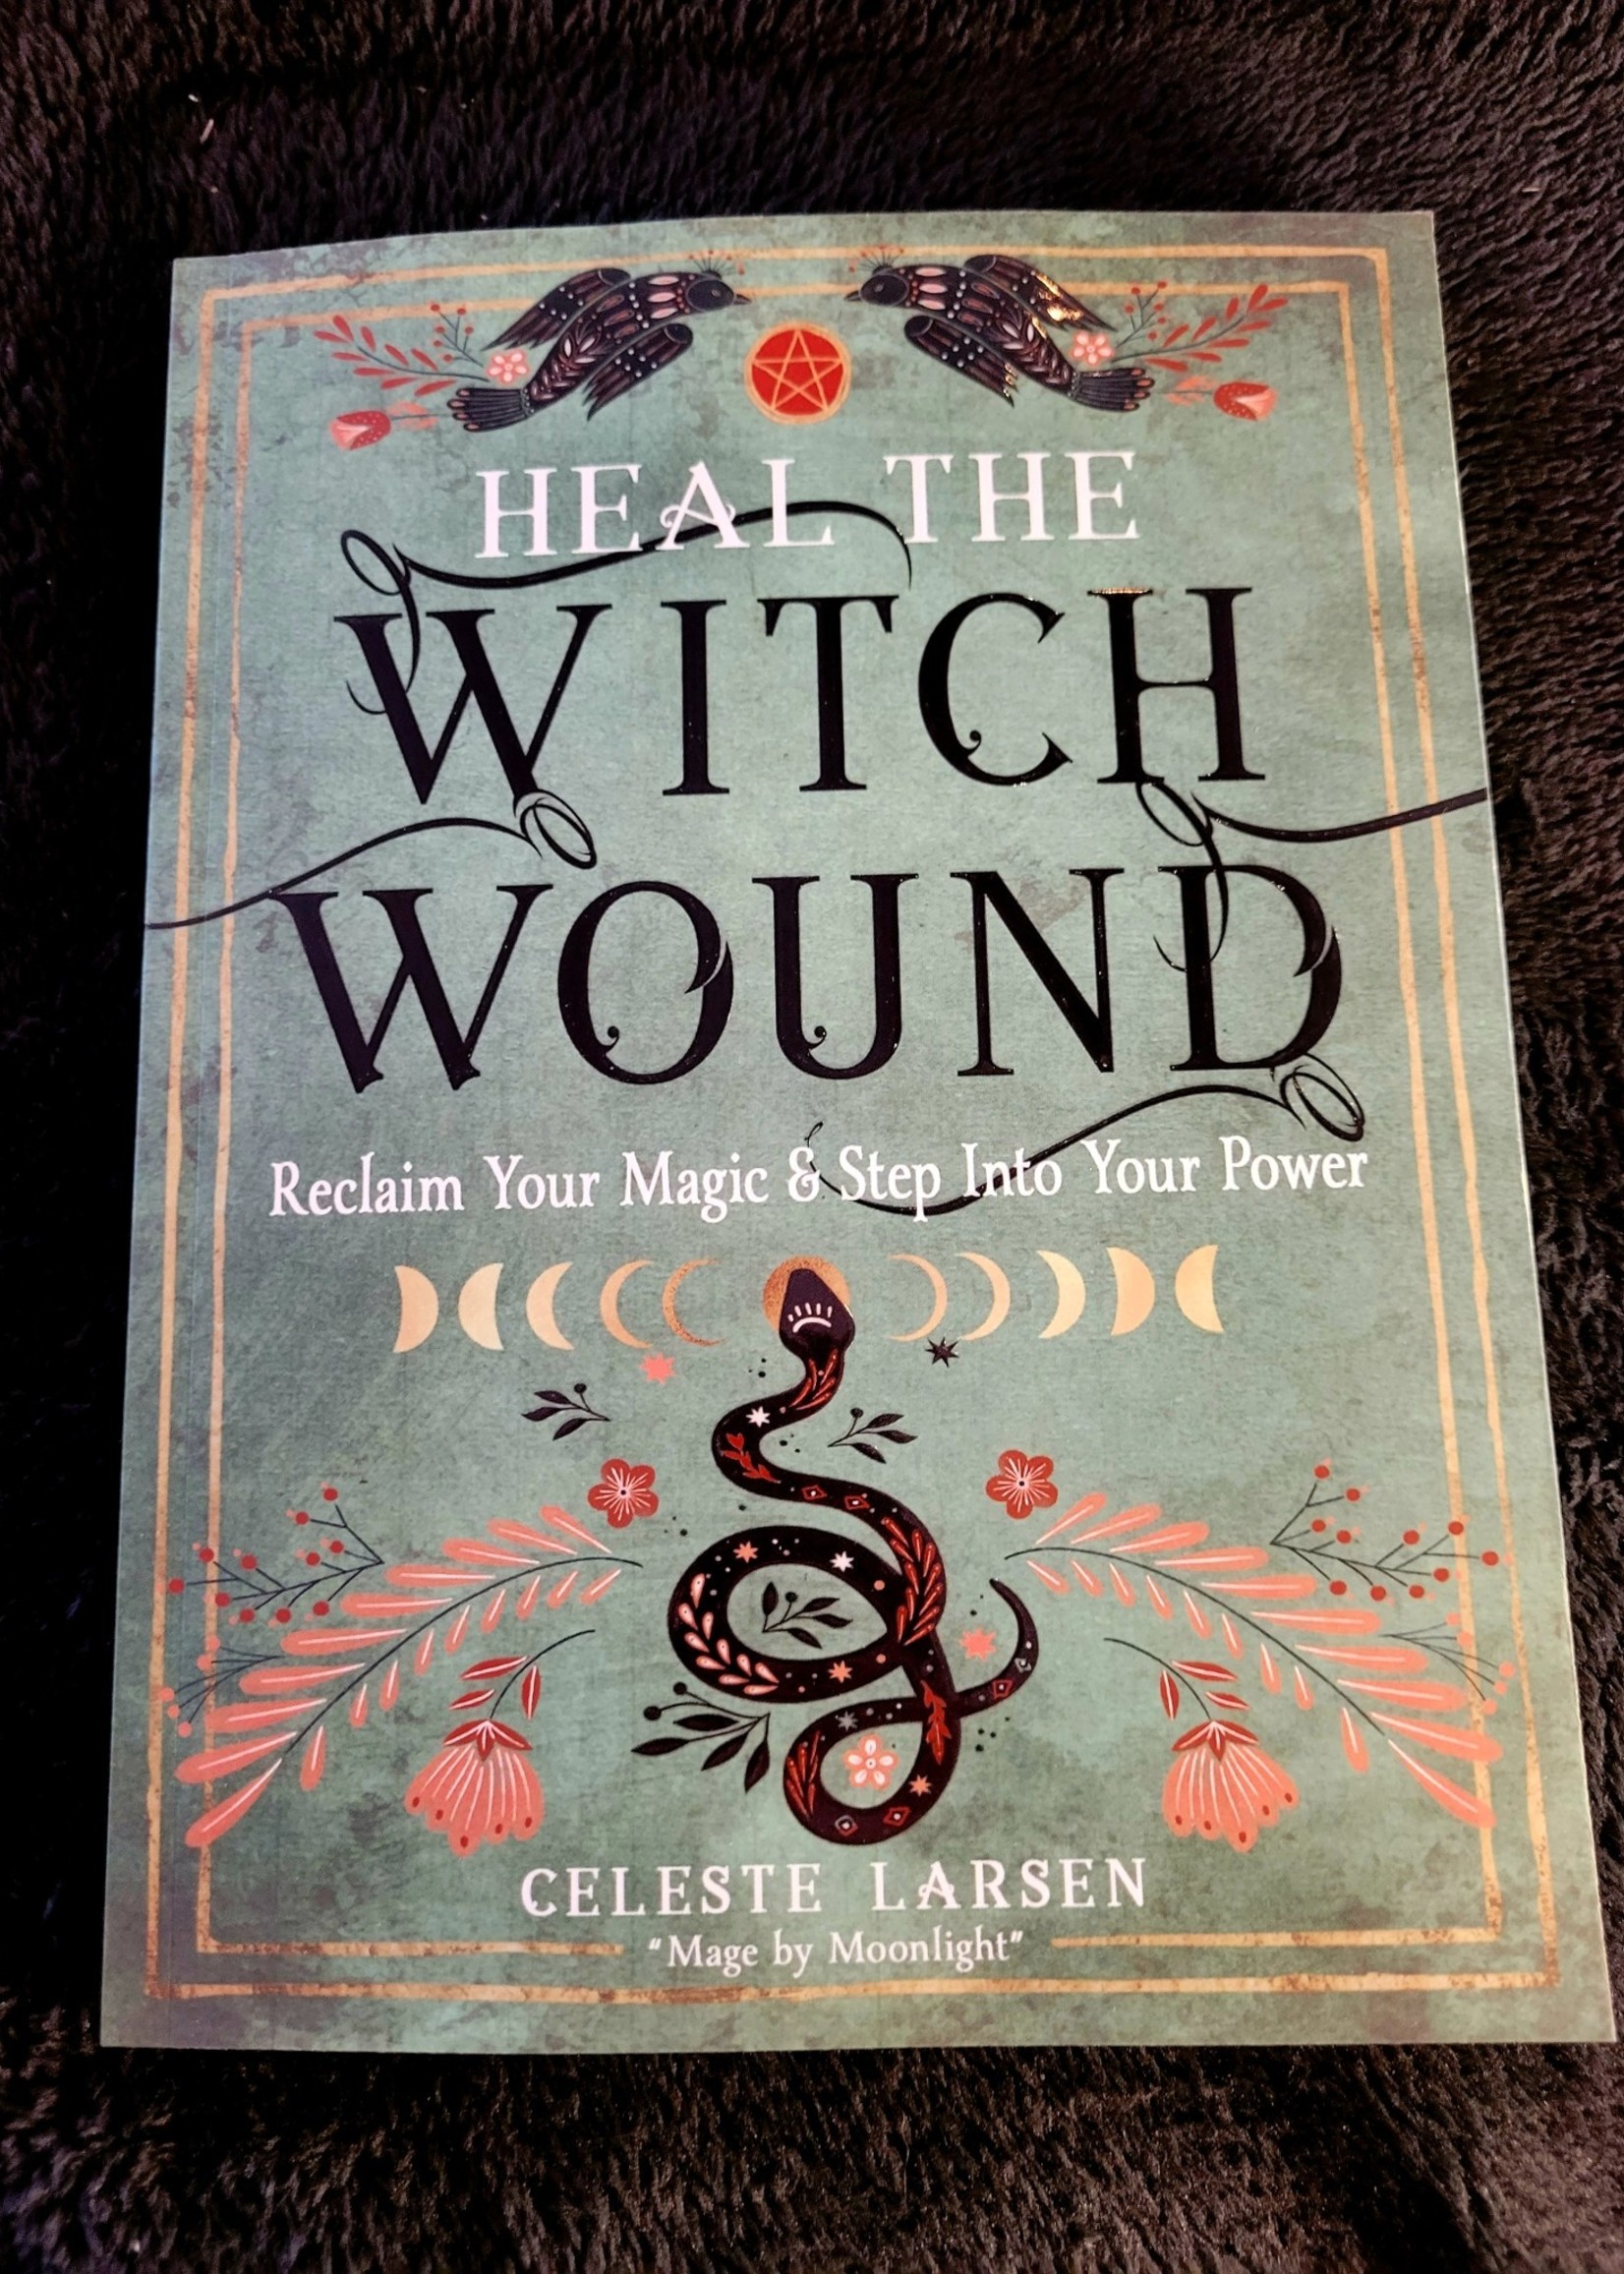 Heal the Witch Wound Reclaim Your Magic and Step Into Your Power - Celeste Larsen